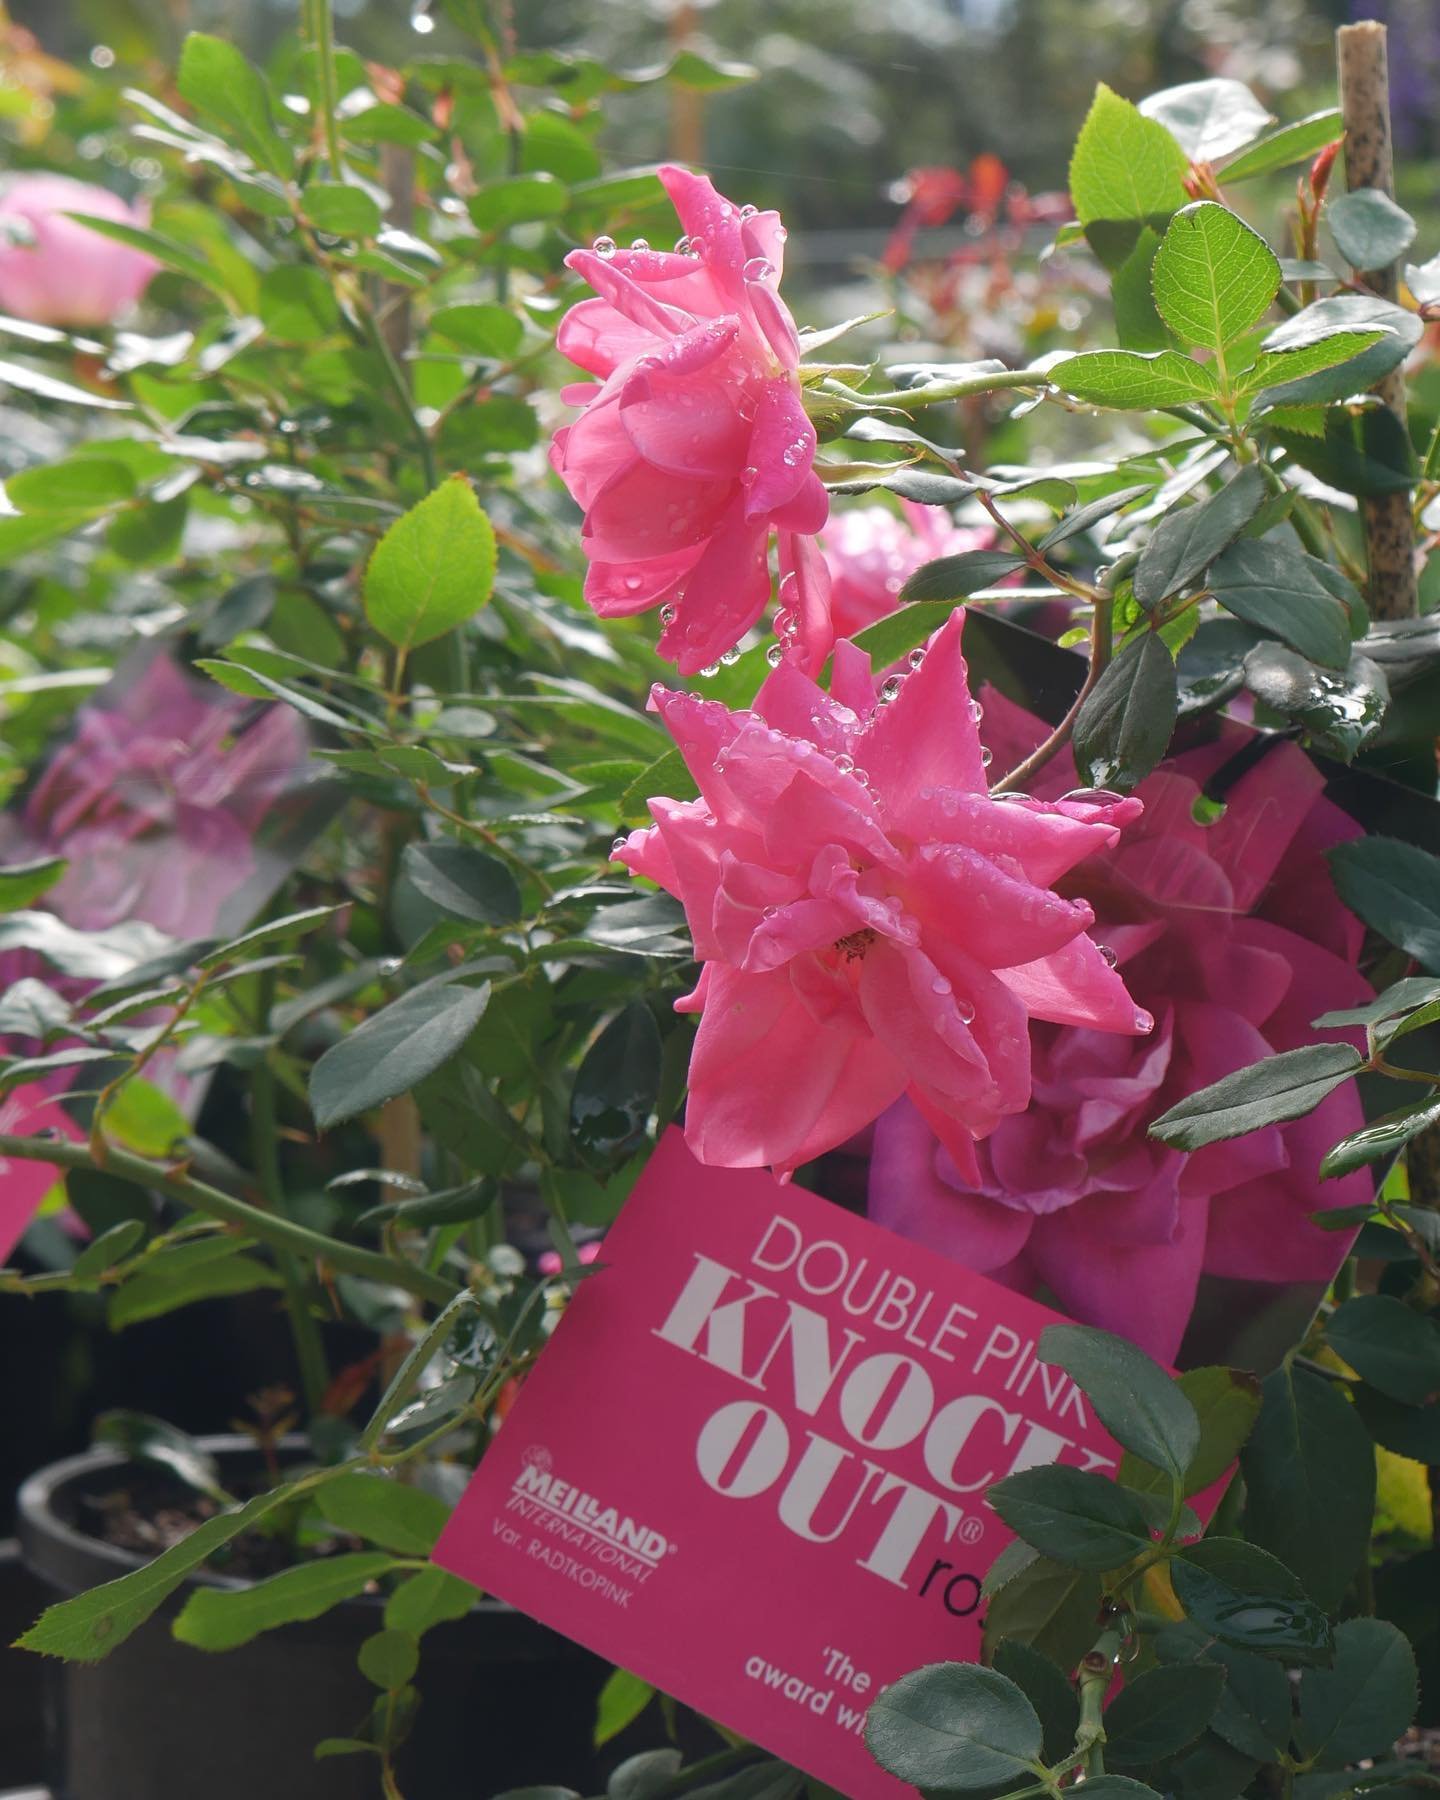 🌼 So much colour in the nursery right now!🌷

With Mother&rsquo;s Day around the corner why not get her a gift that keeps on giving? 🌹

We&rsquo;ve got a huge variety of native and exotic species that are looking fantastic at the moment! Our hortic